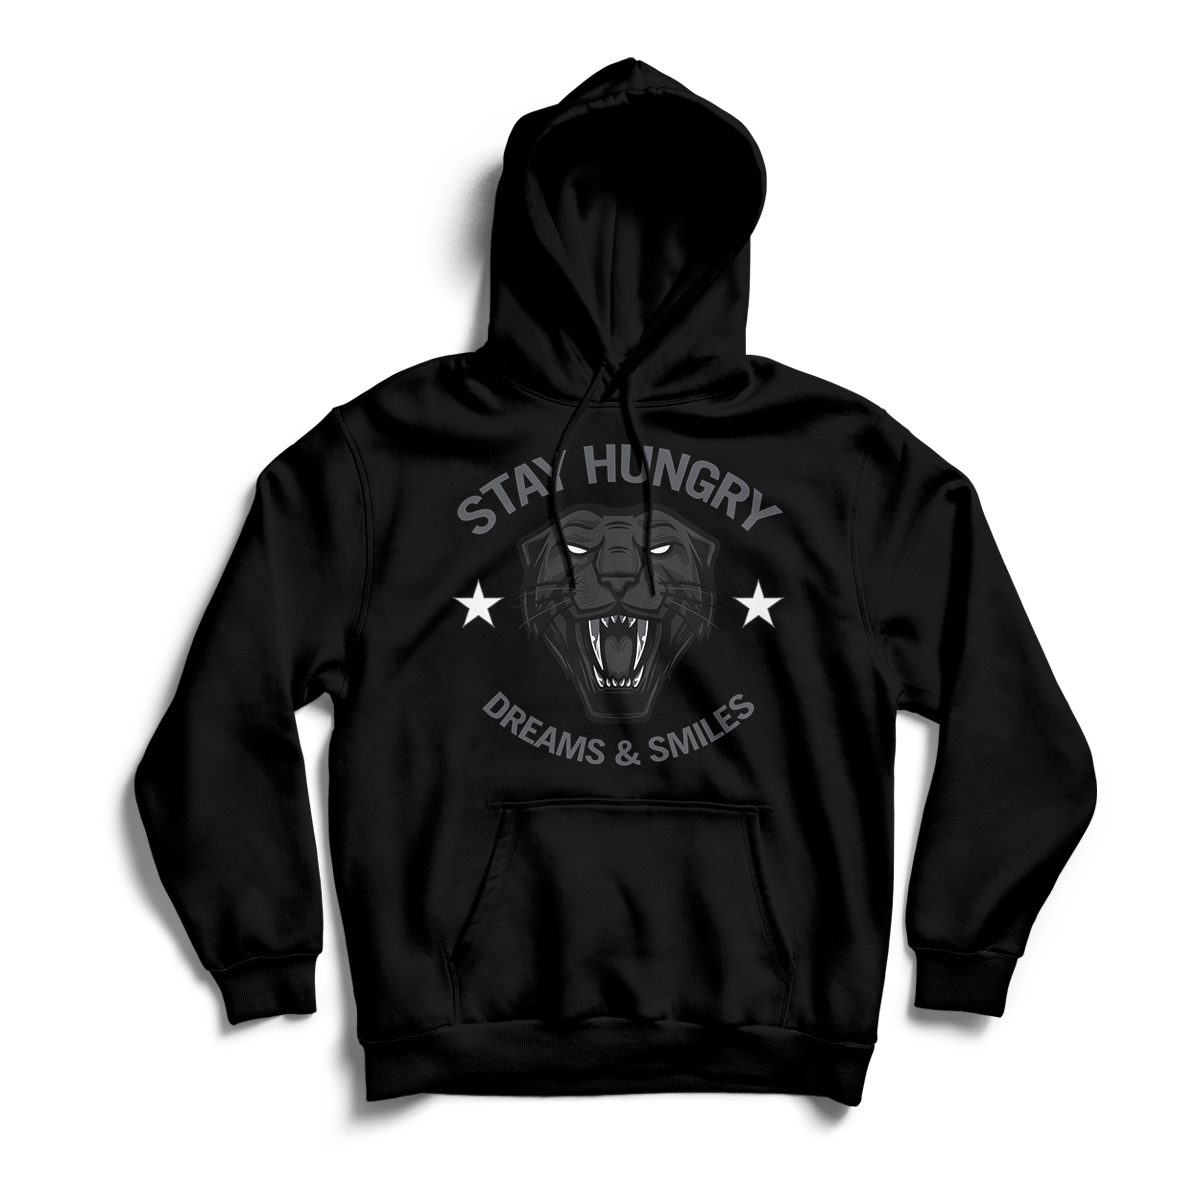 'Stay Hungry' in Black Cat CW Unisex Pullover Hoodie